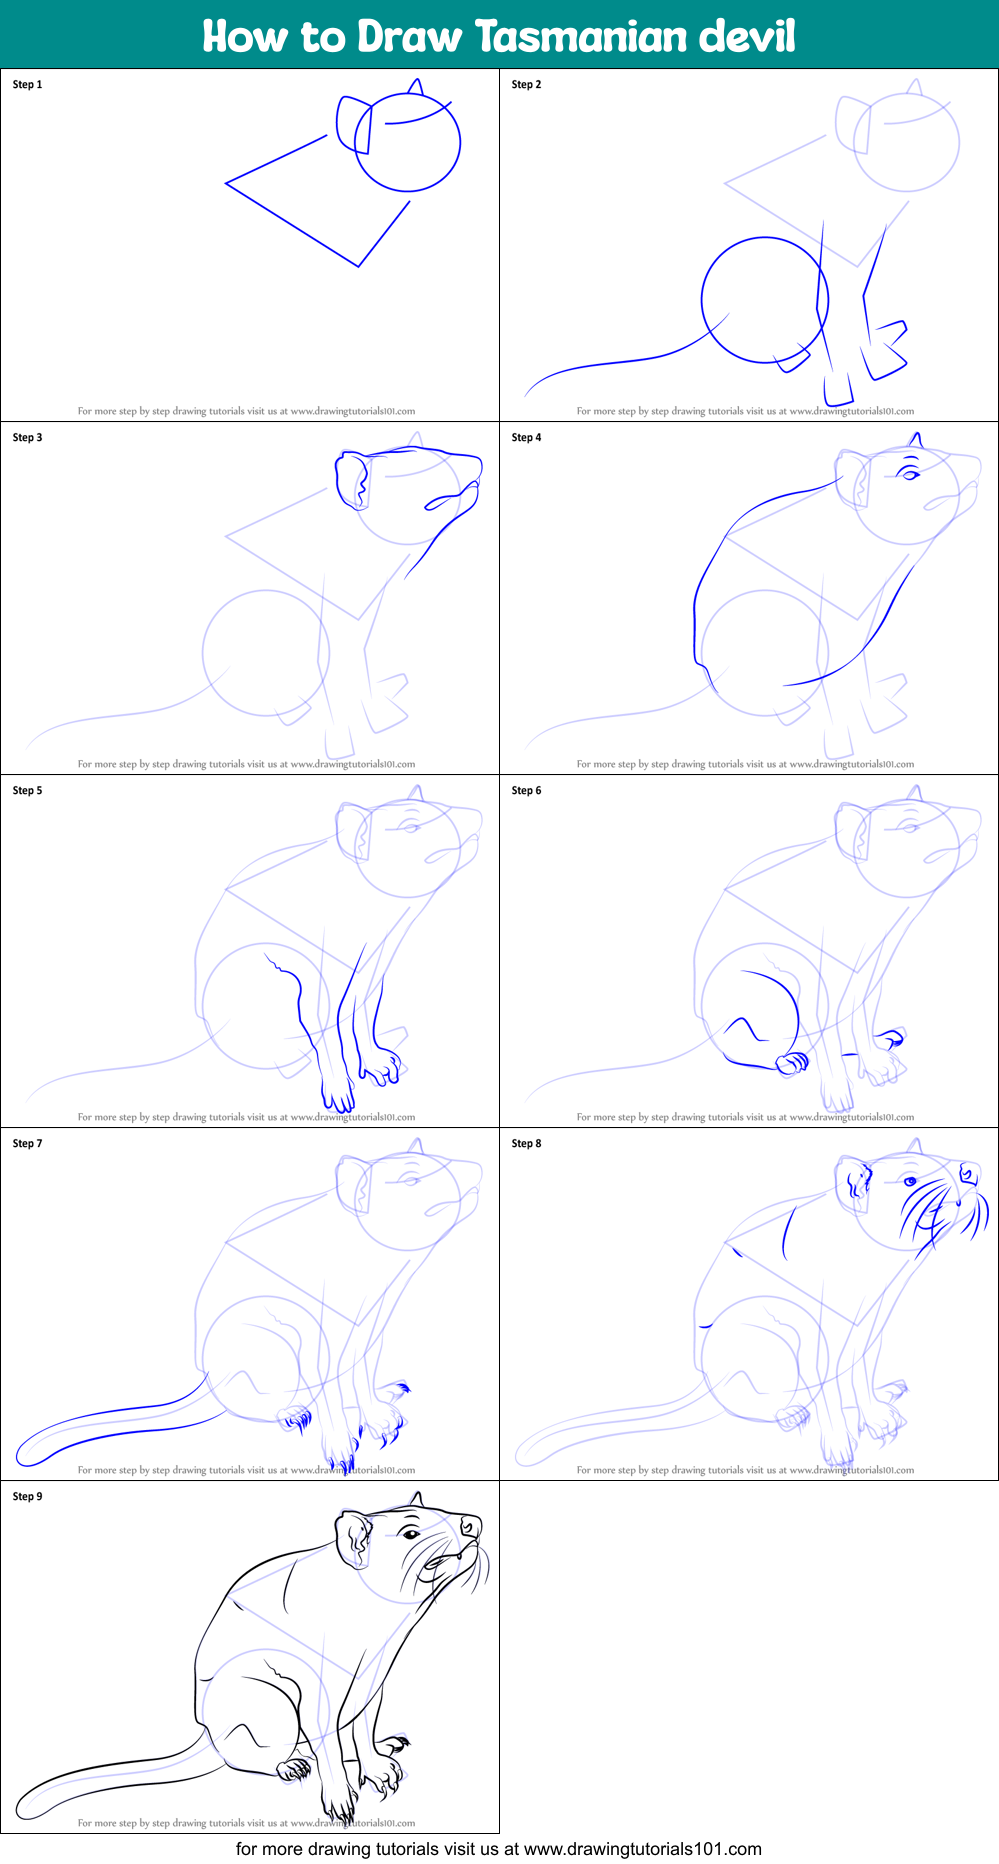 How to Draw Tasmanian devil printable step by step drawing sheet